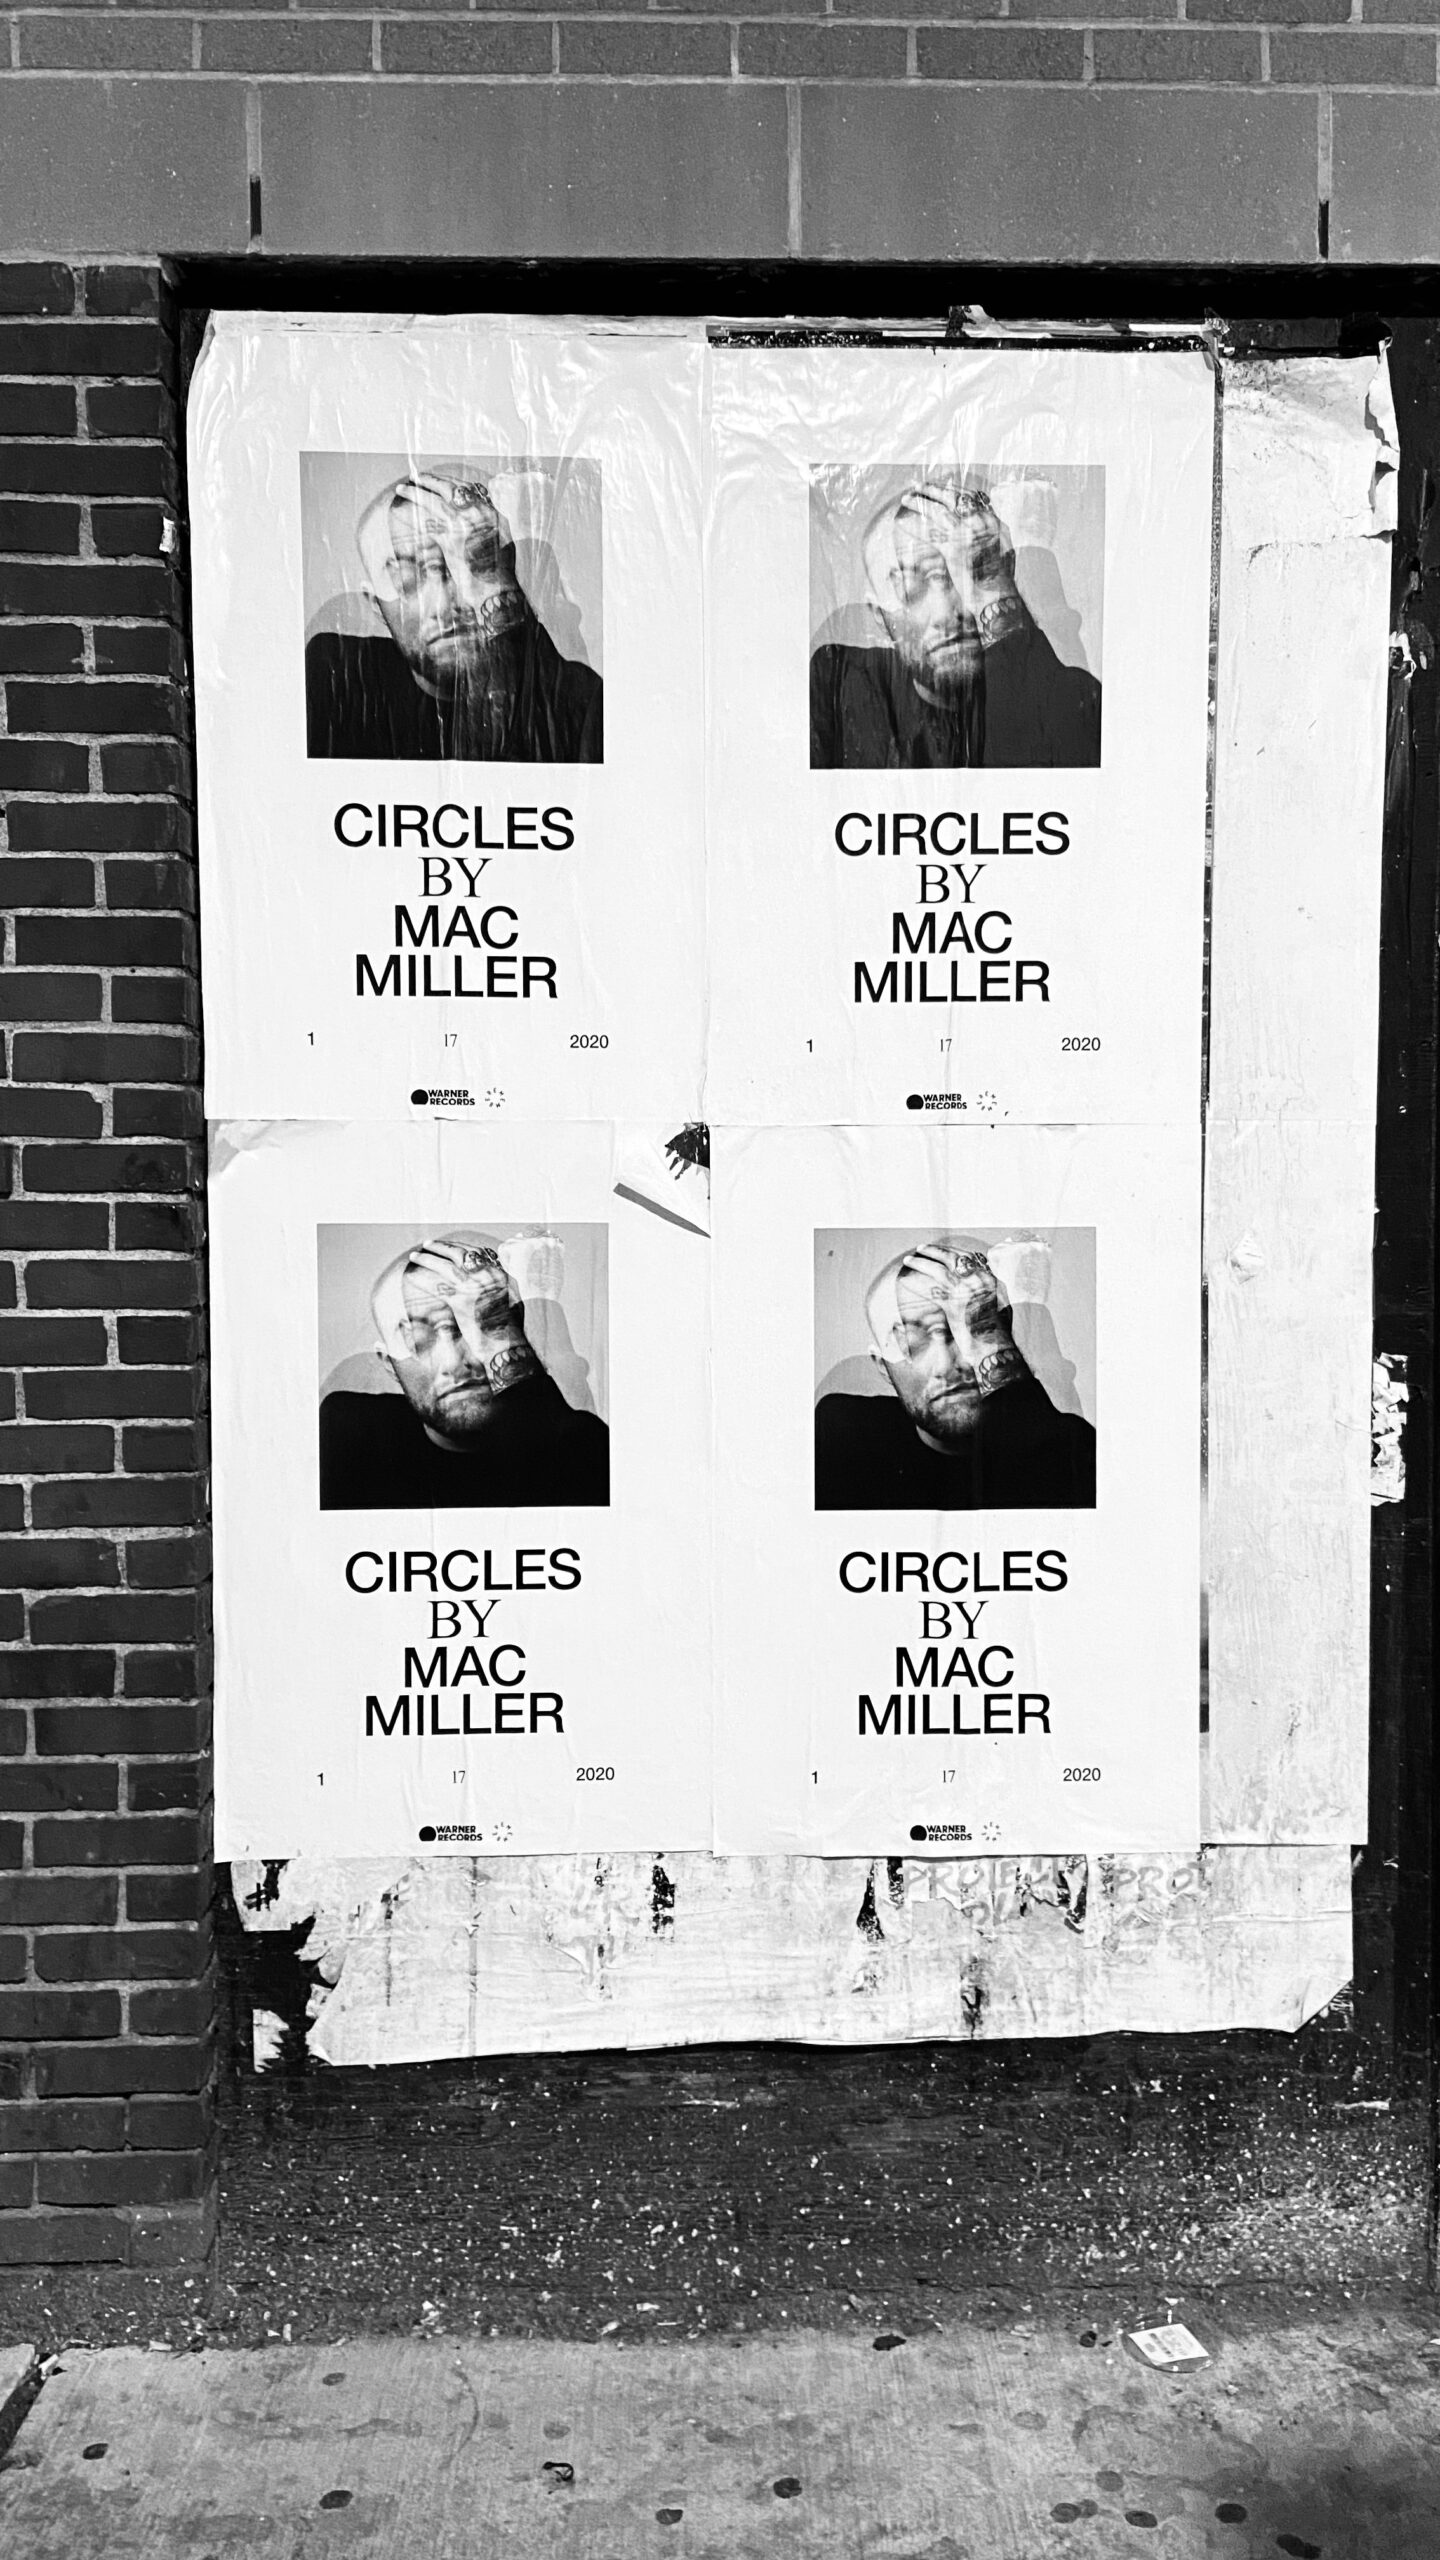 Posters one the street about Mac Miller